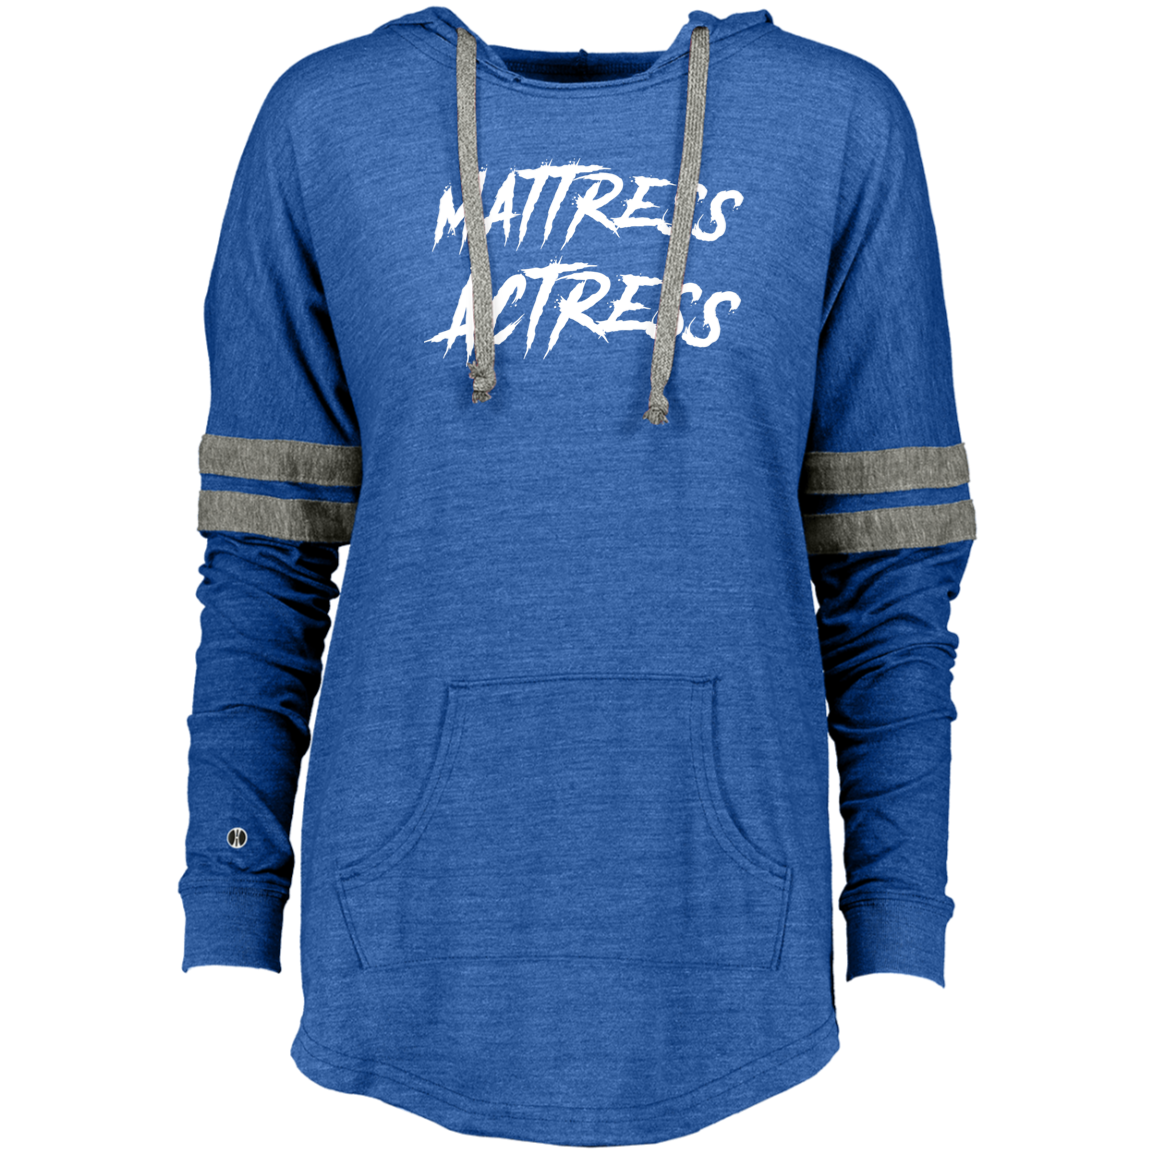 "Mattress Actress" Ladies Hooded Low Key Pullover